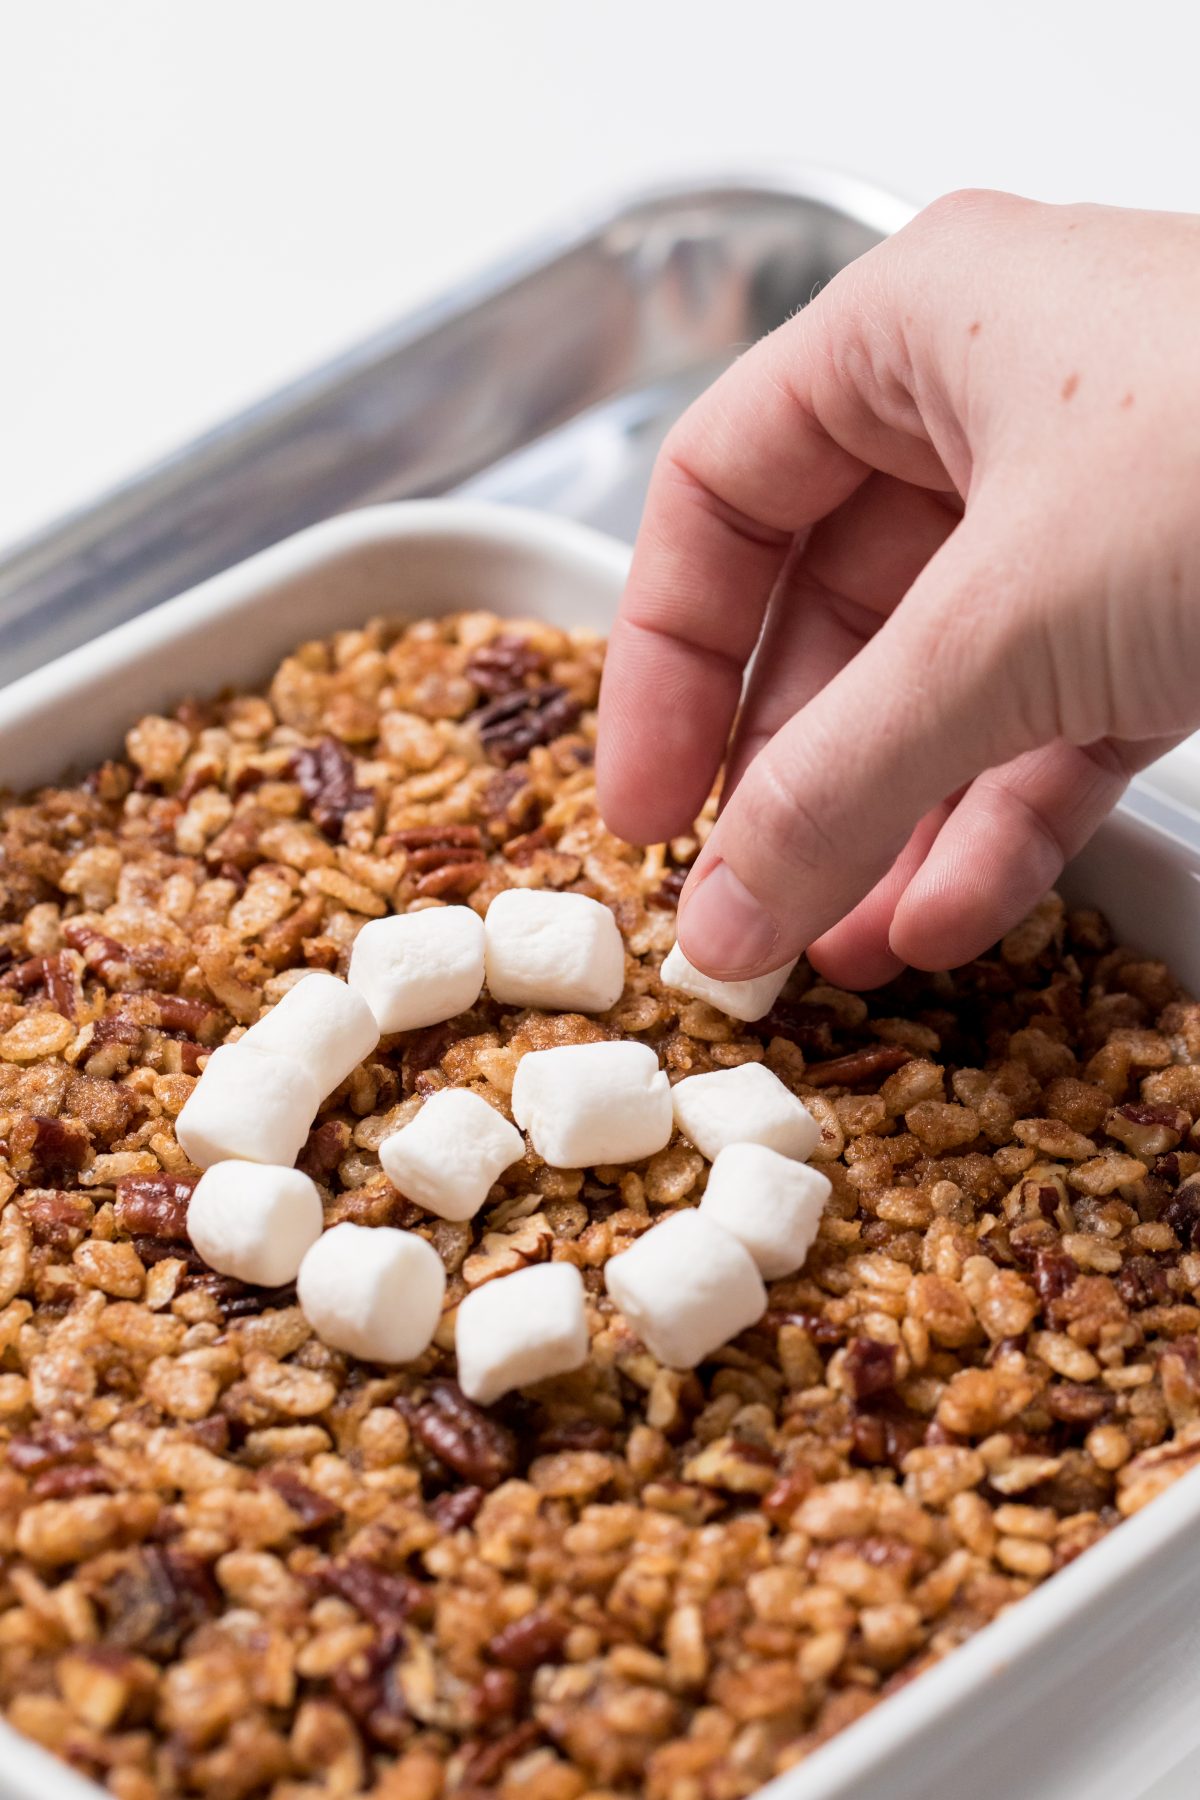 5D4B5961 - Sweet Potato Casserole with Pecan Topping - Decorate the casserole with marshmallows